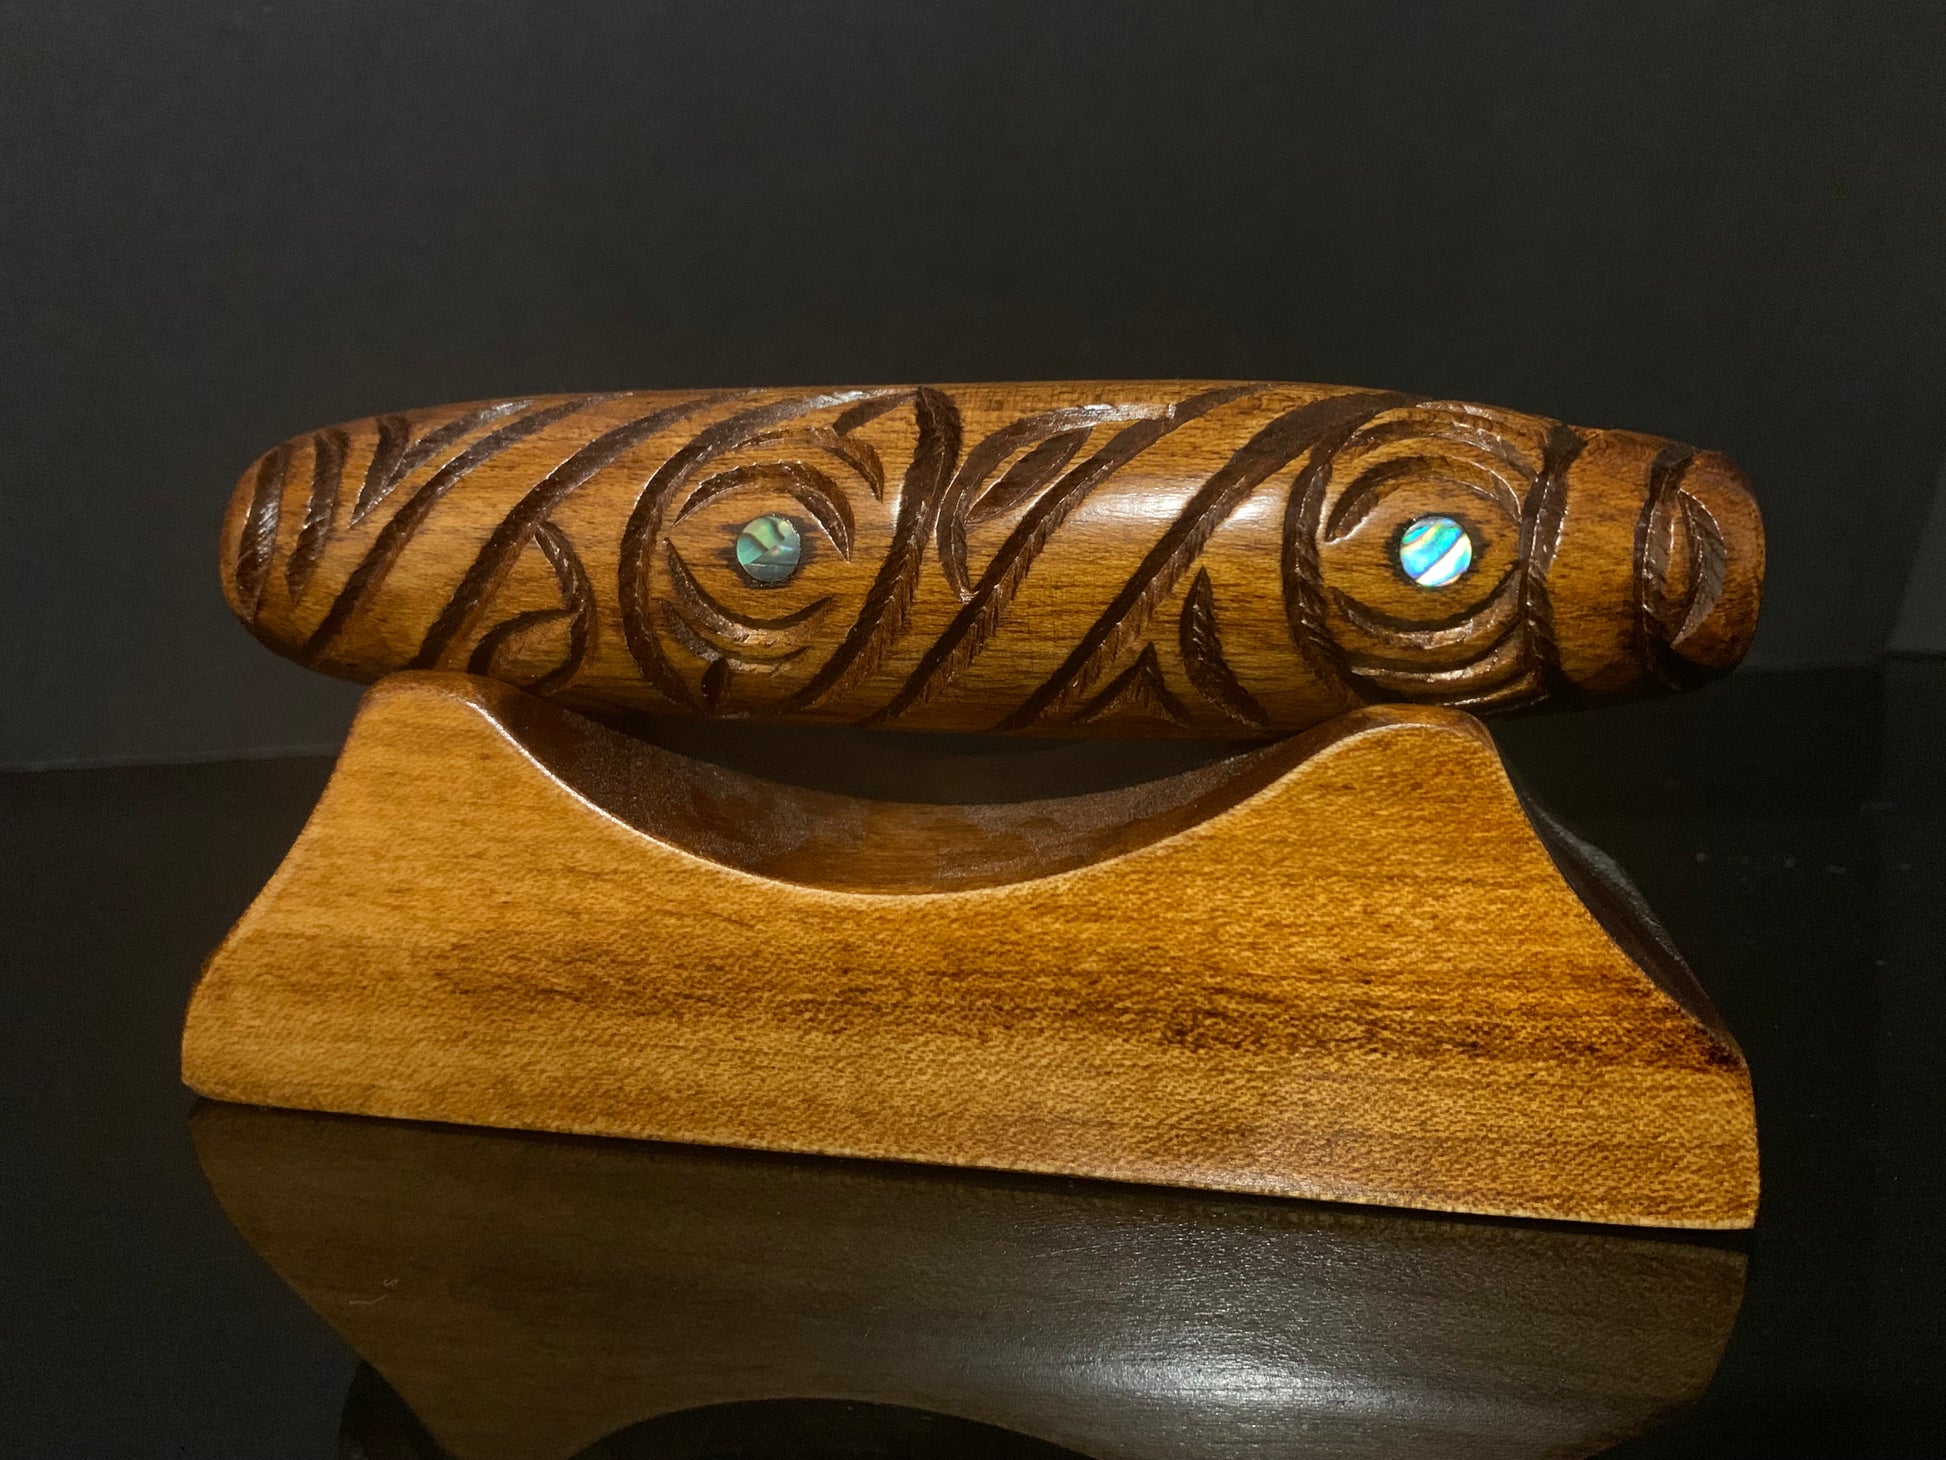 Koauau flute carved in New Zealand and available from Silver Fern Gallery